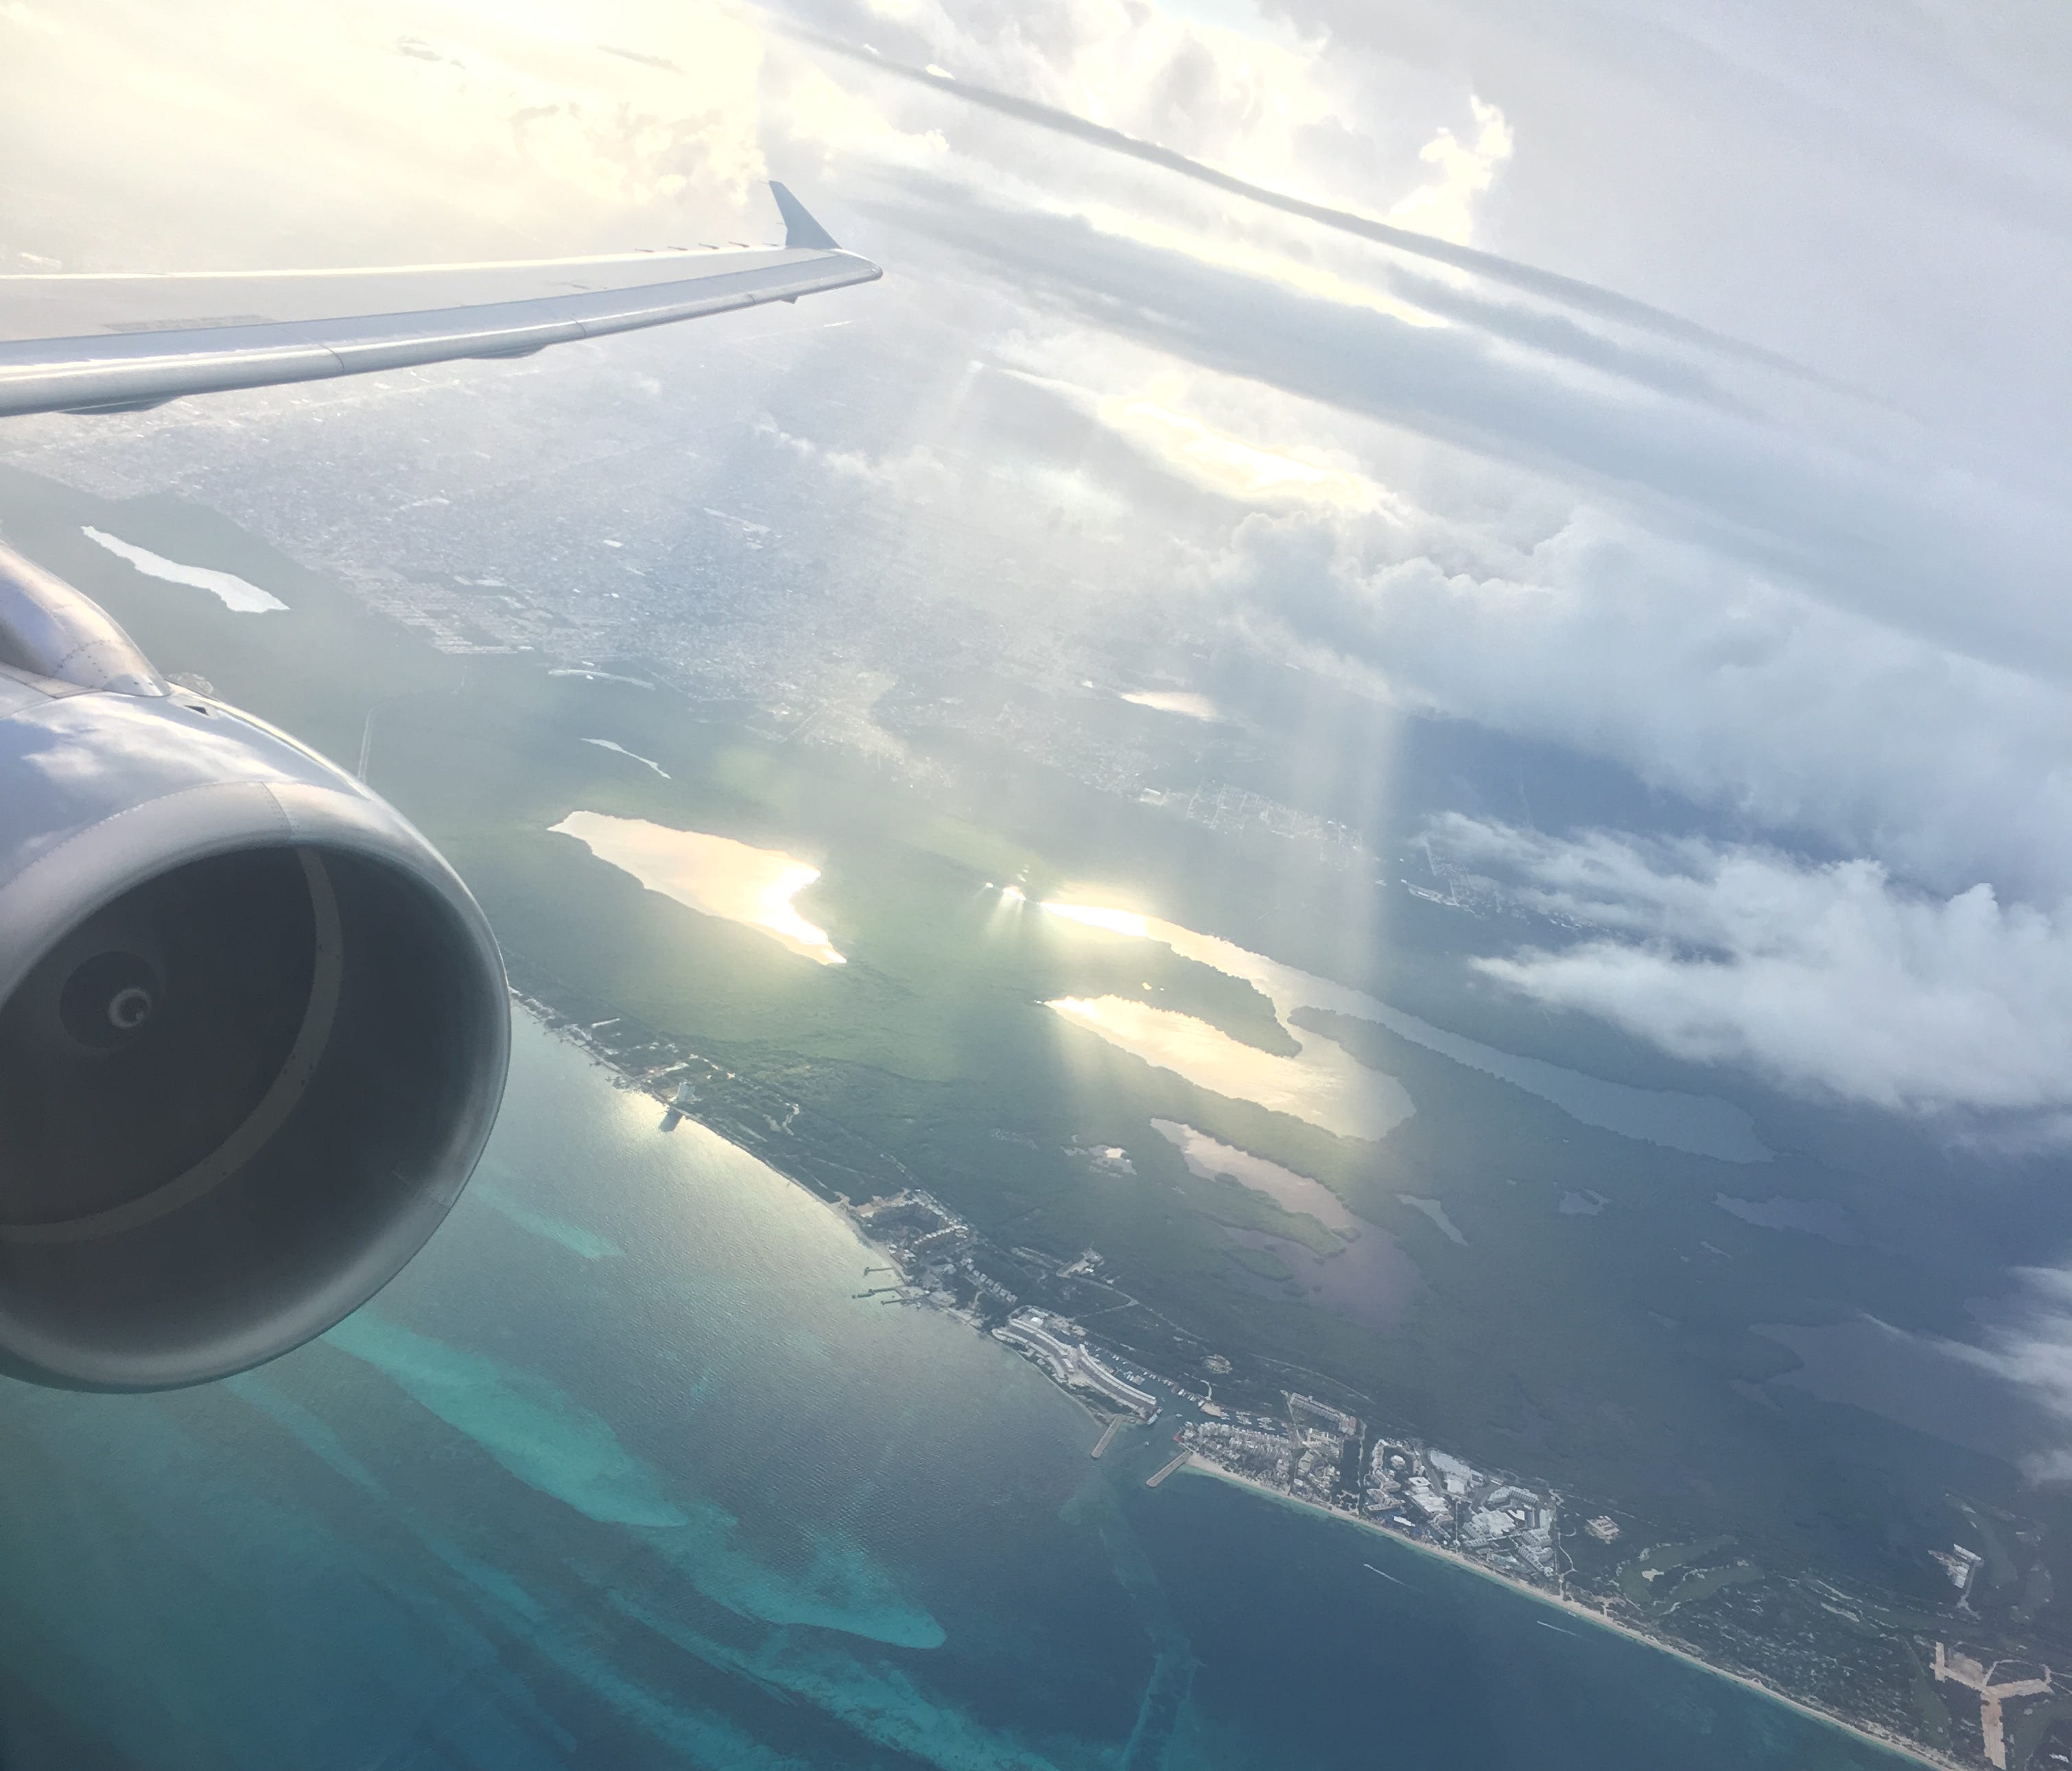 The shoreline near Cancun can be seen from an American Airlines flight bound for Charlotte on Jan. 4, 2017.